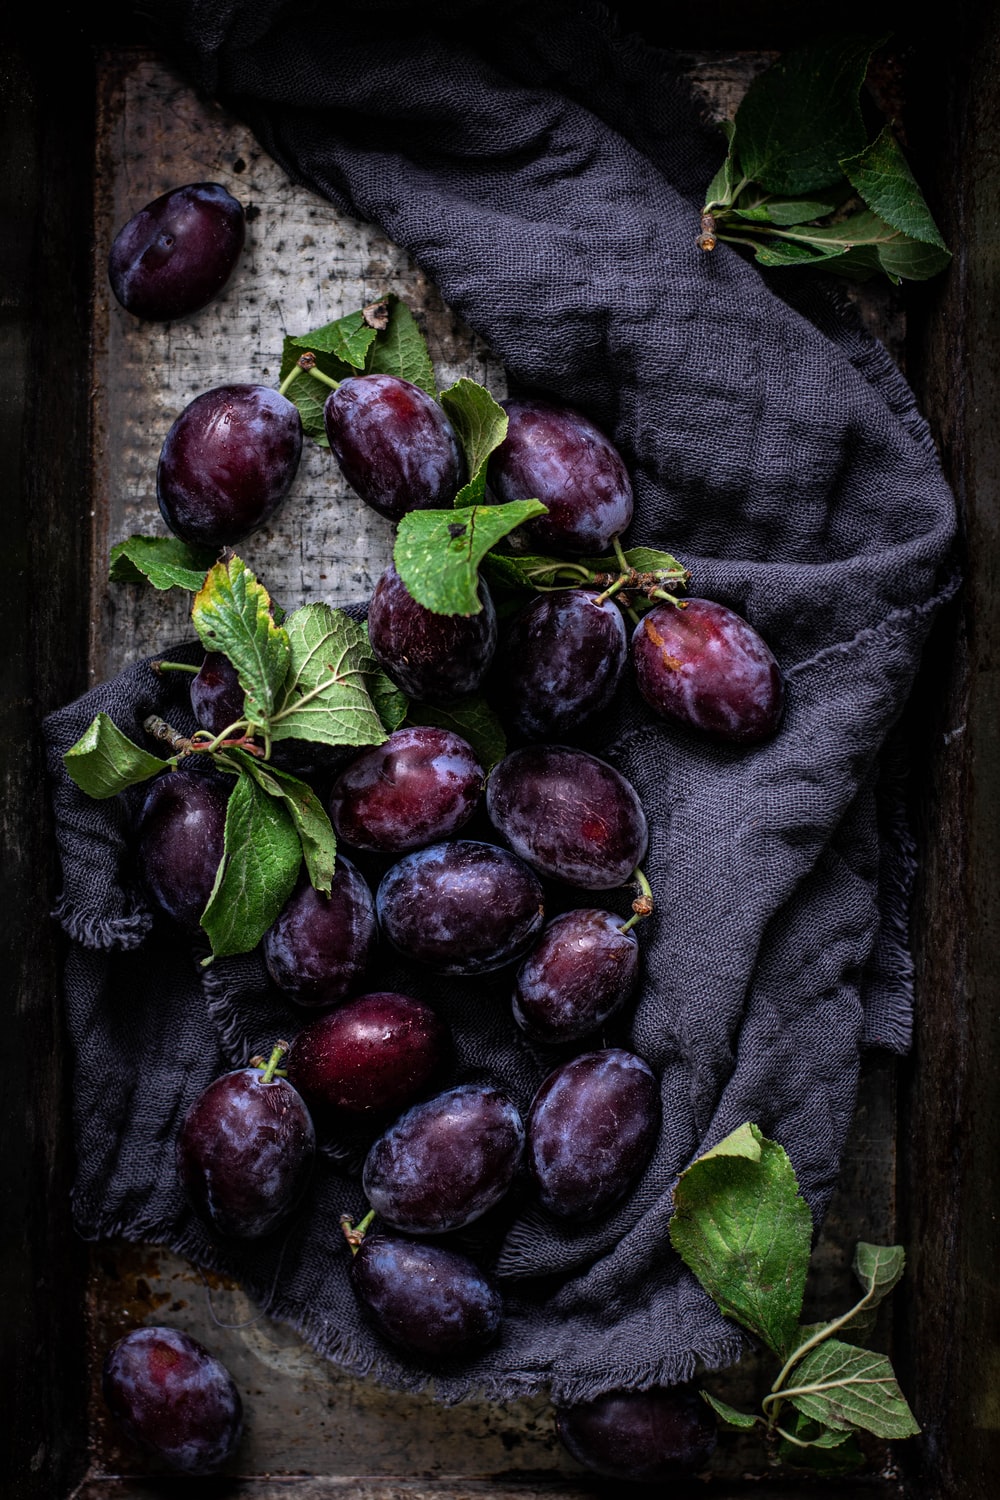 Plums Picture. Download Free Image